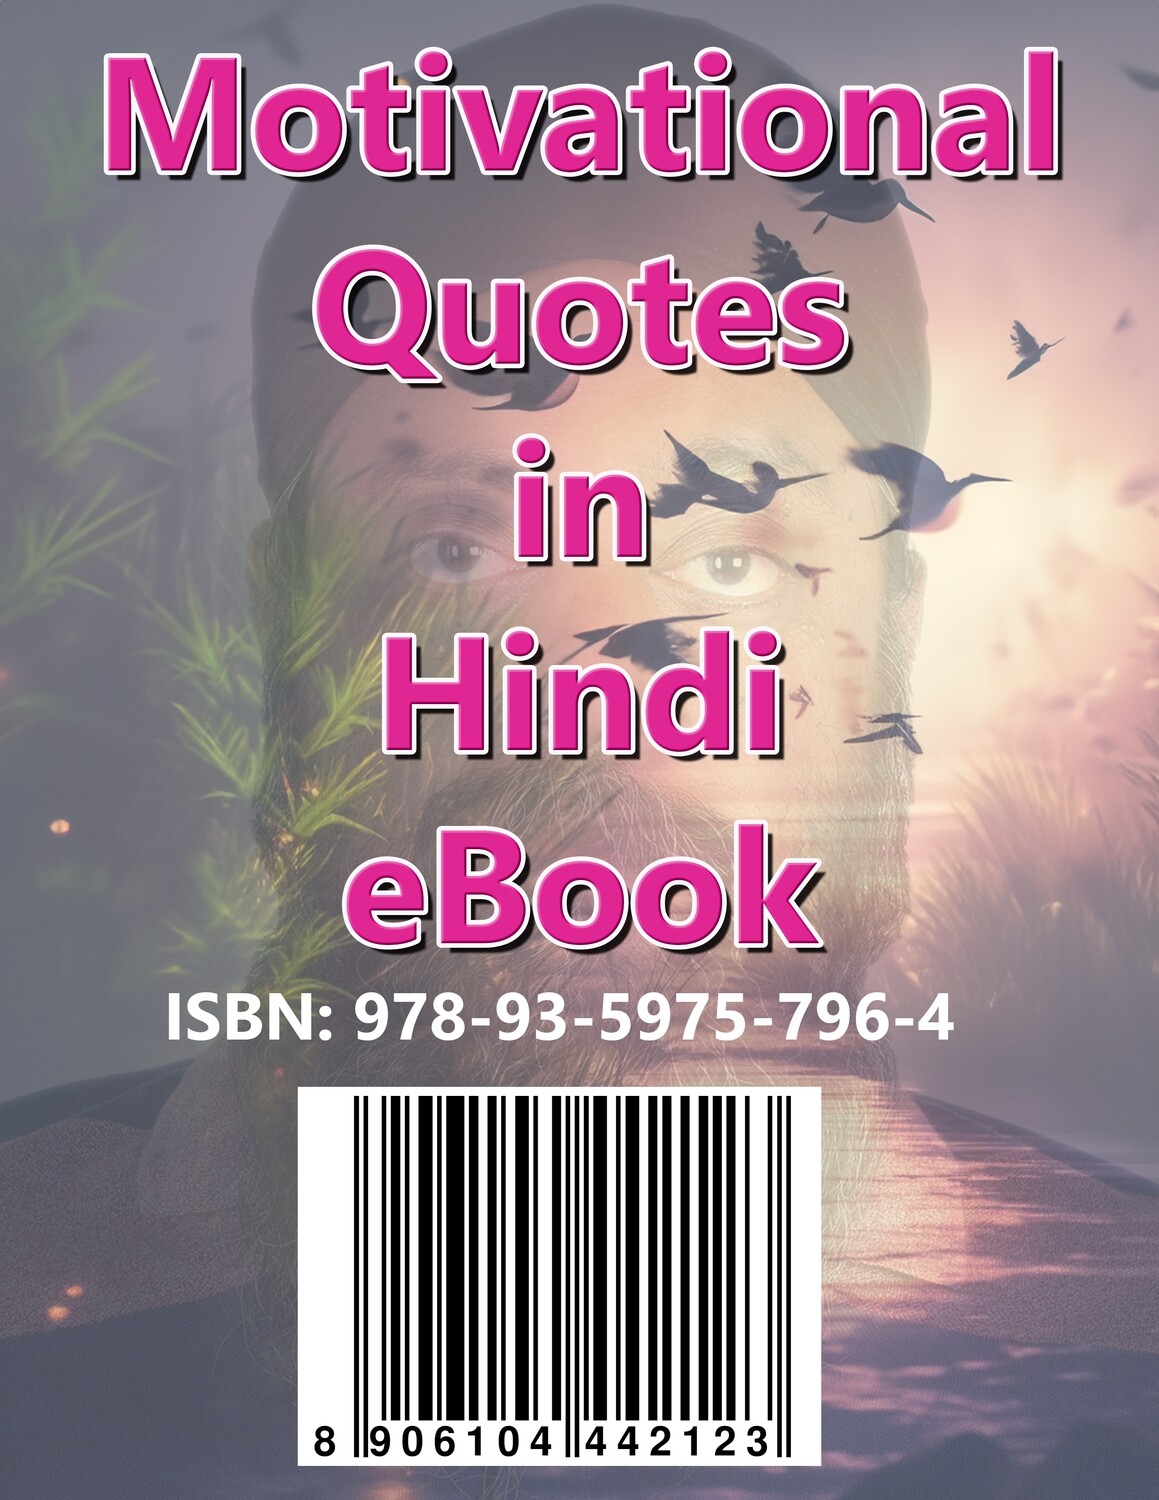 Motivational Quotes in Hindi eBook